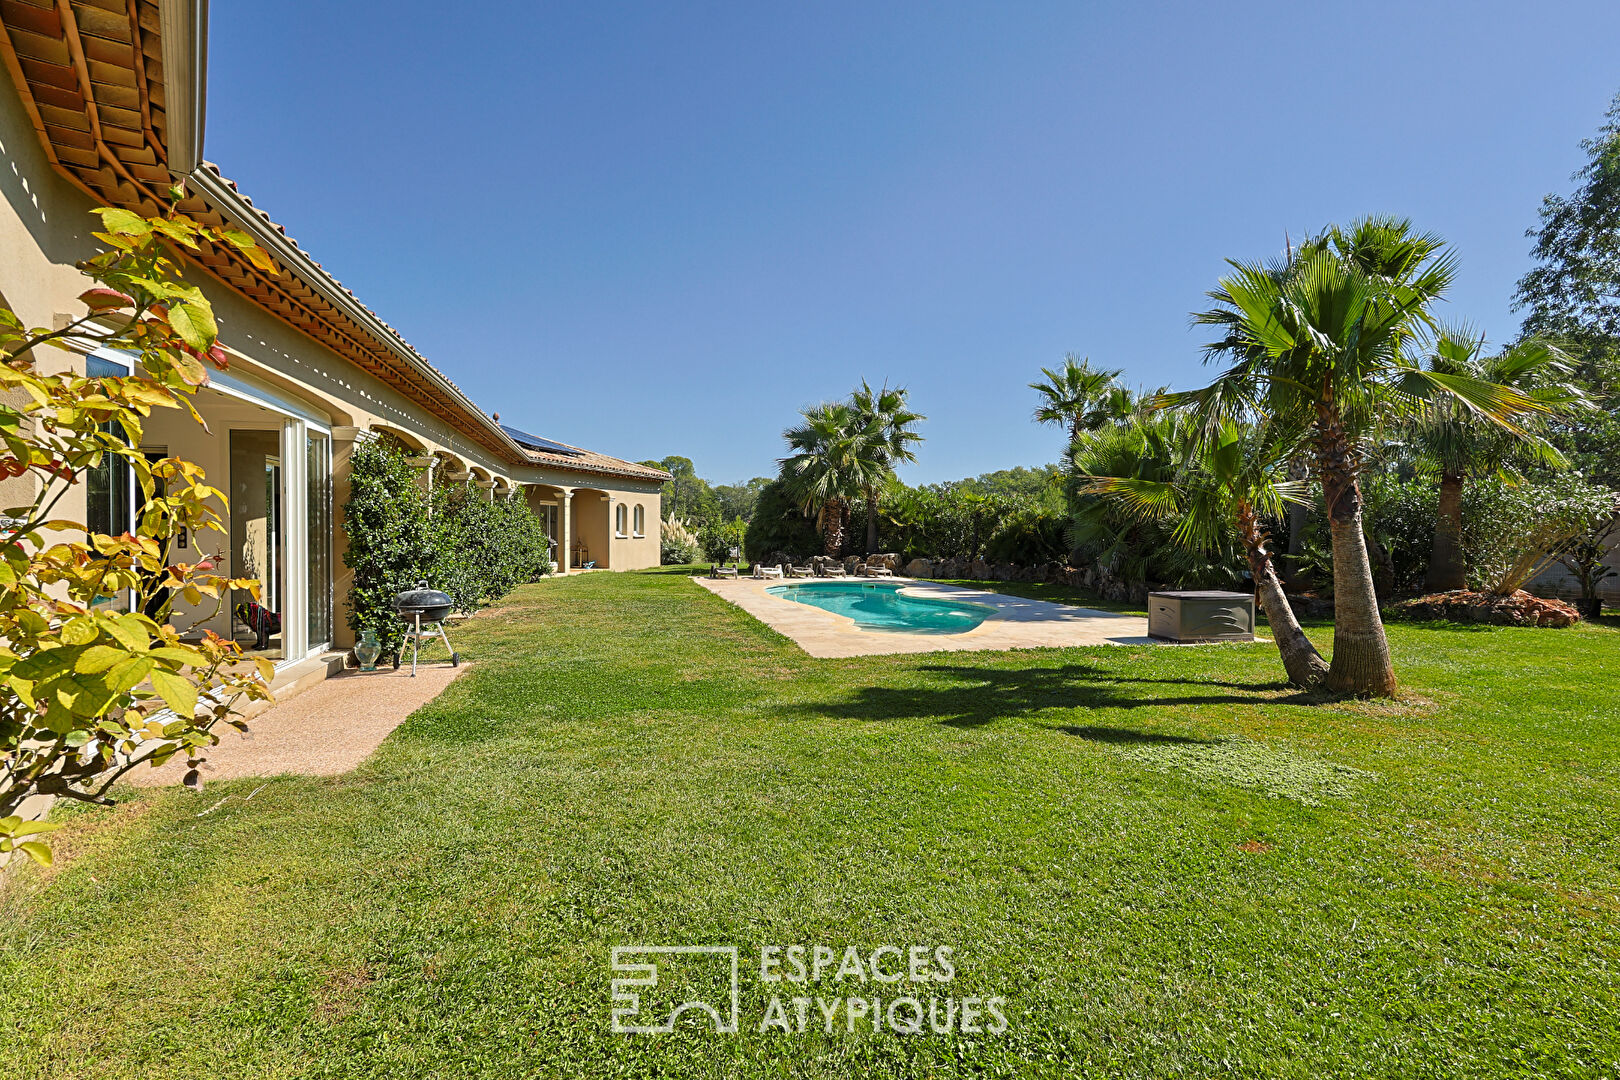 Modern villa and its outbuildings on 2 hectares of land